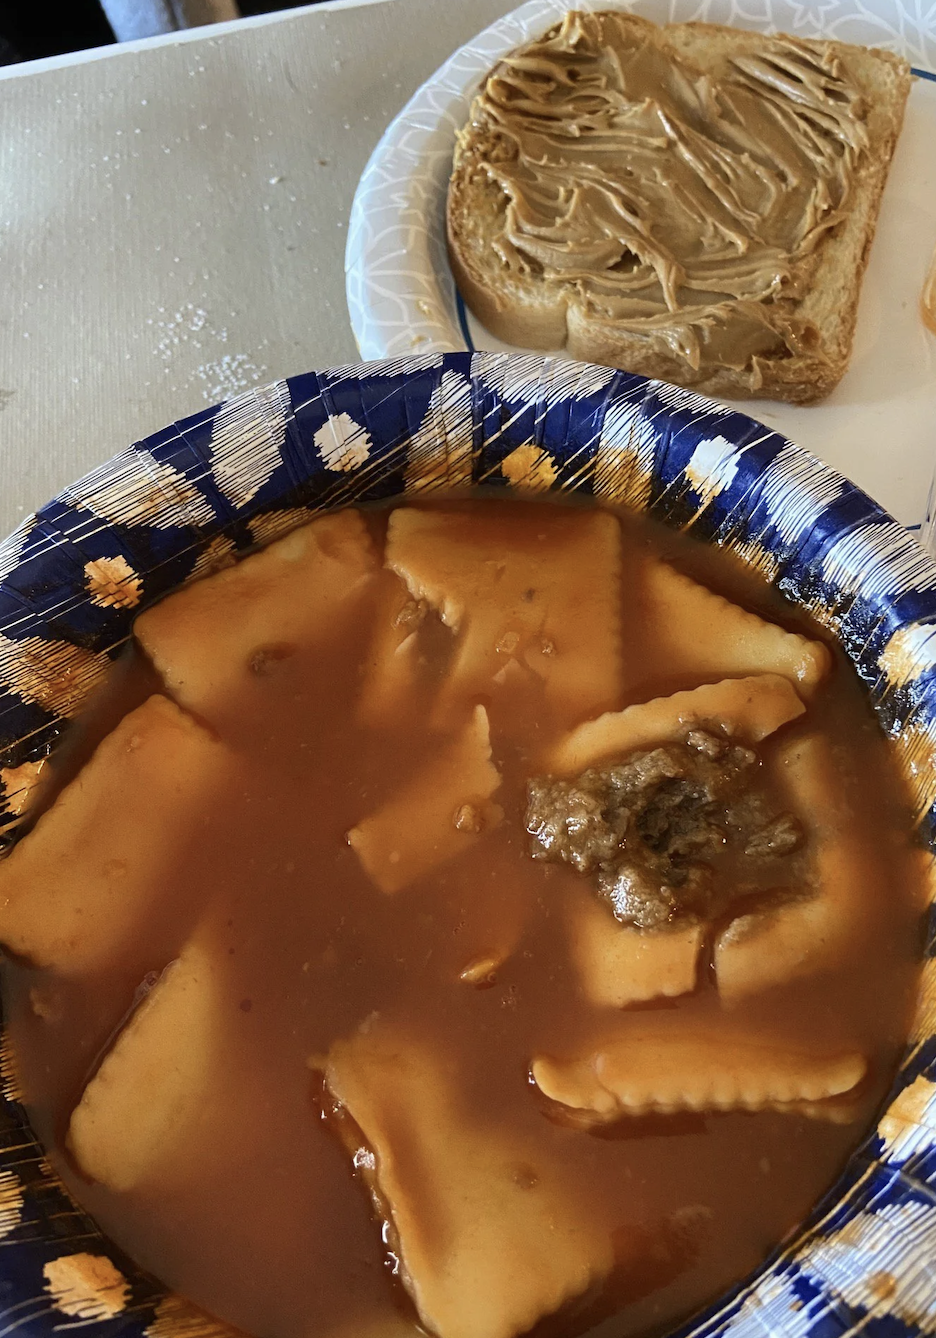 a plate of chef boyardee raviolies next to peanut butter toast